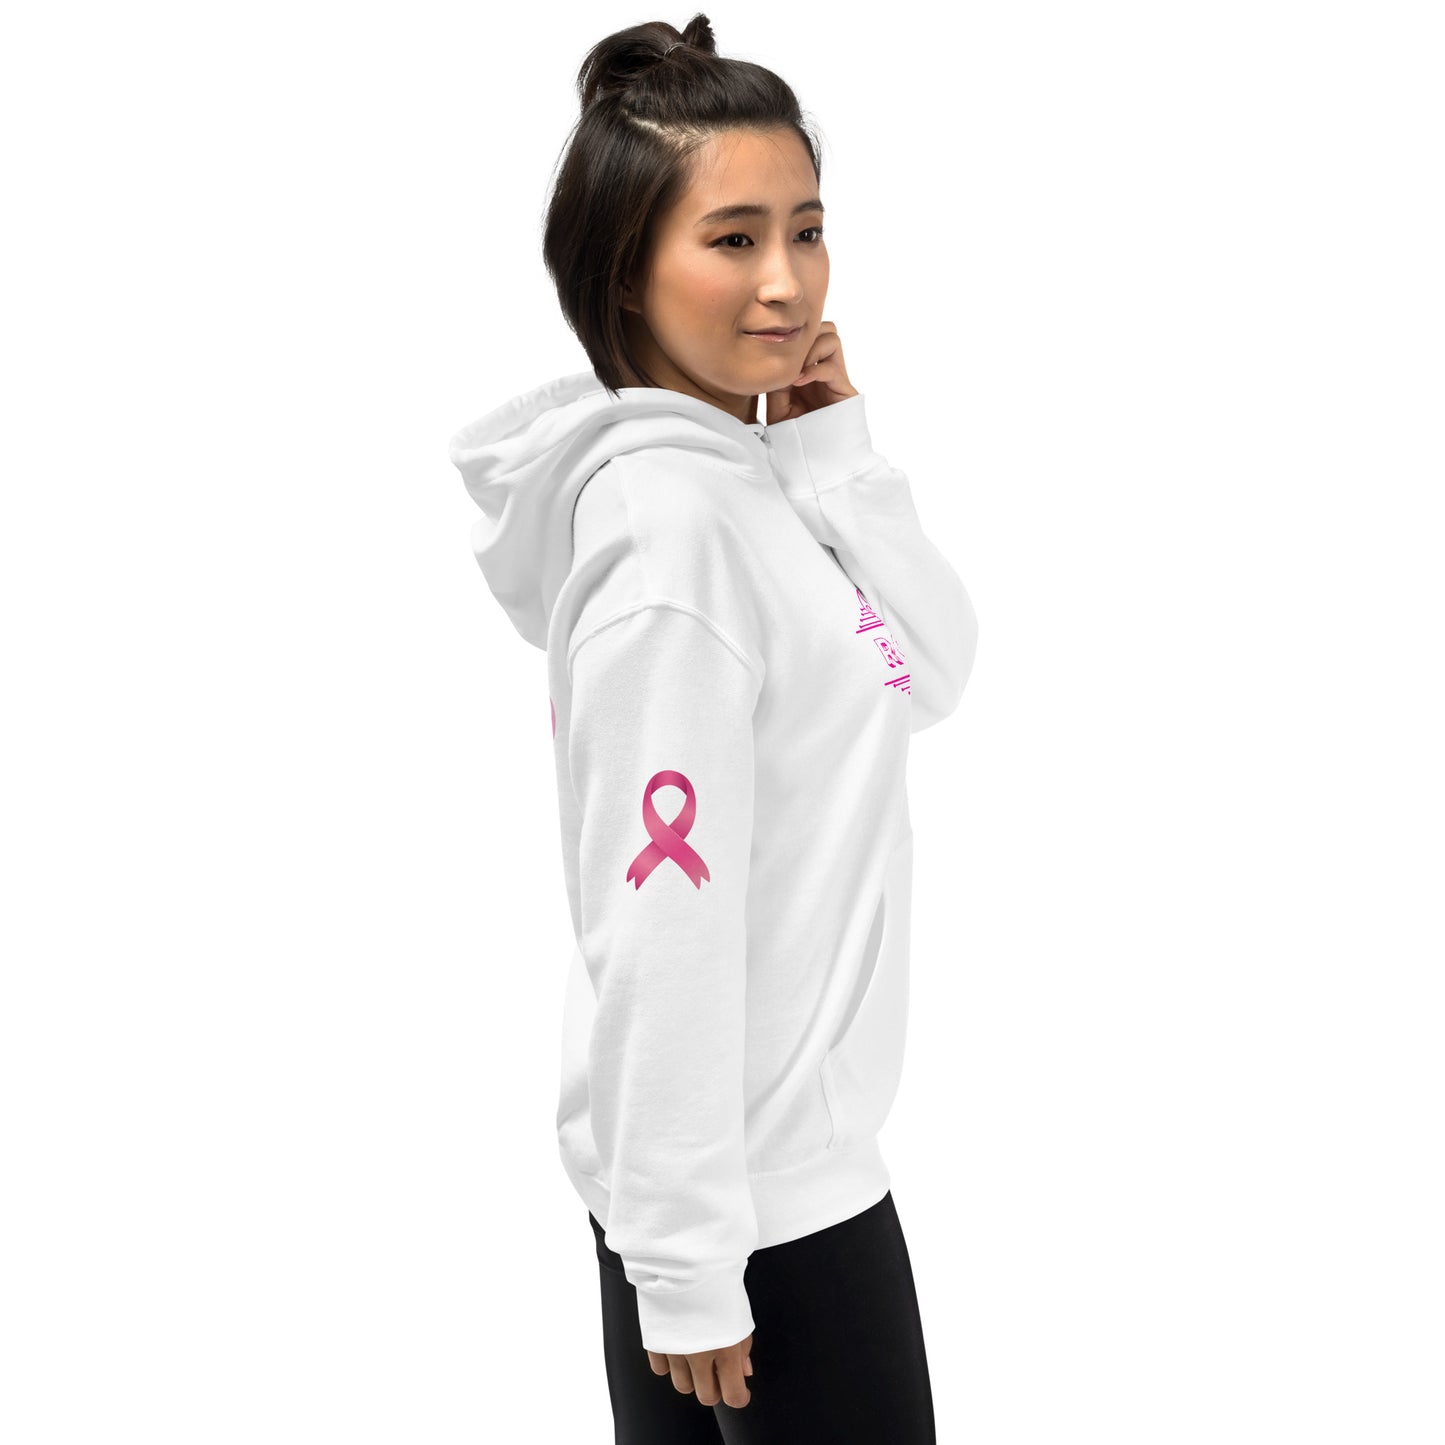 Rock In' Breast Cancer Support Unisex Hoodie